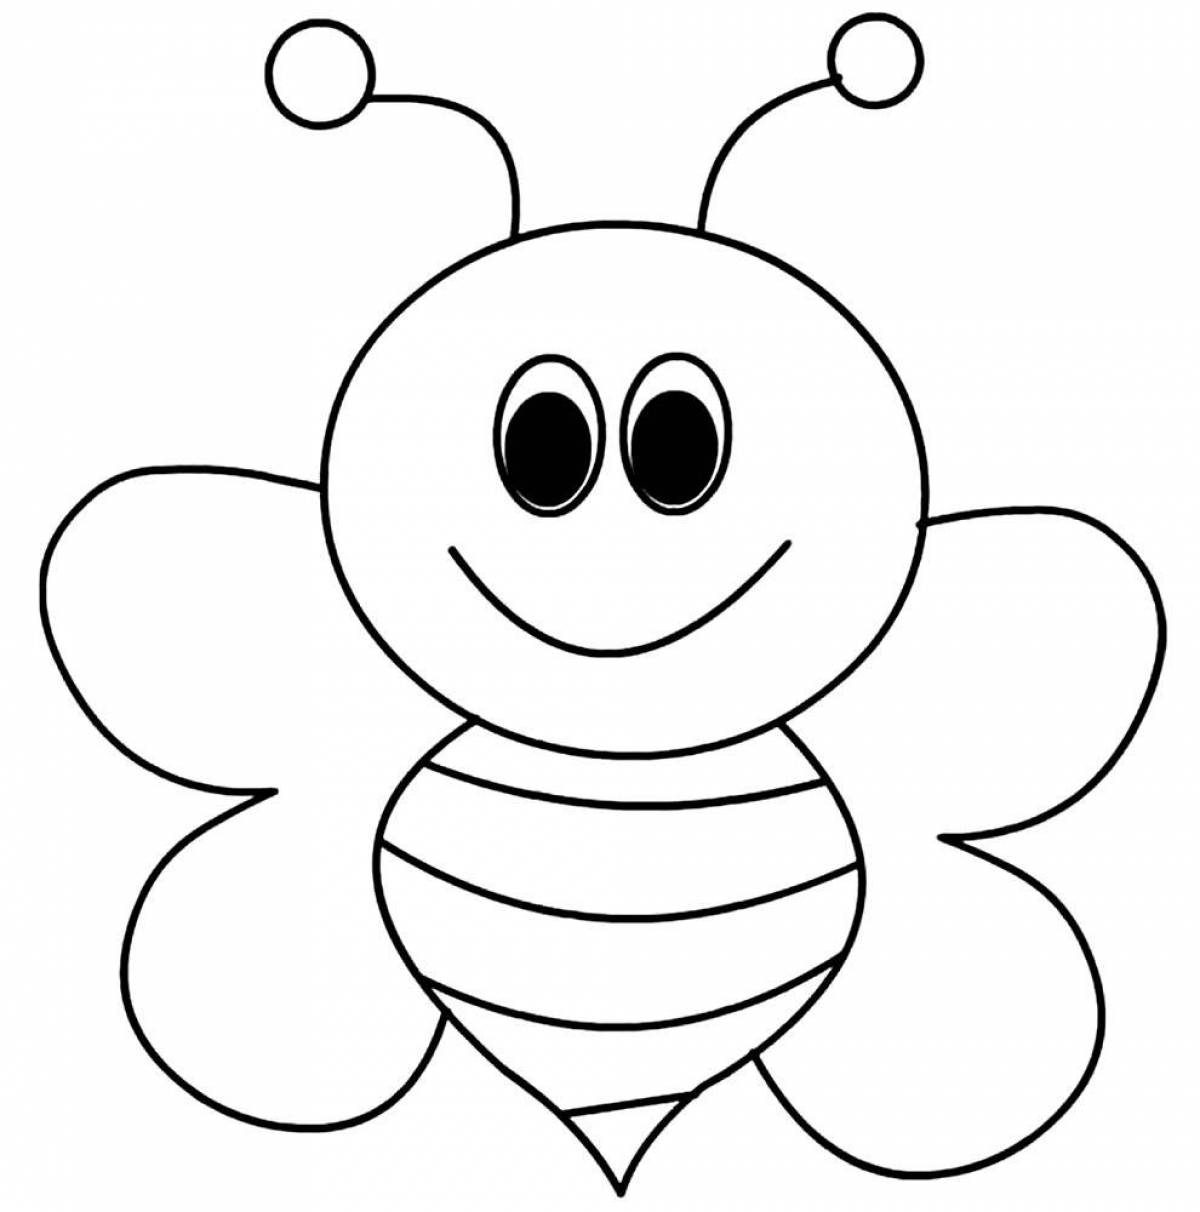 Animated bee coloring page